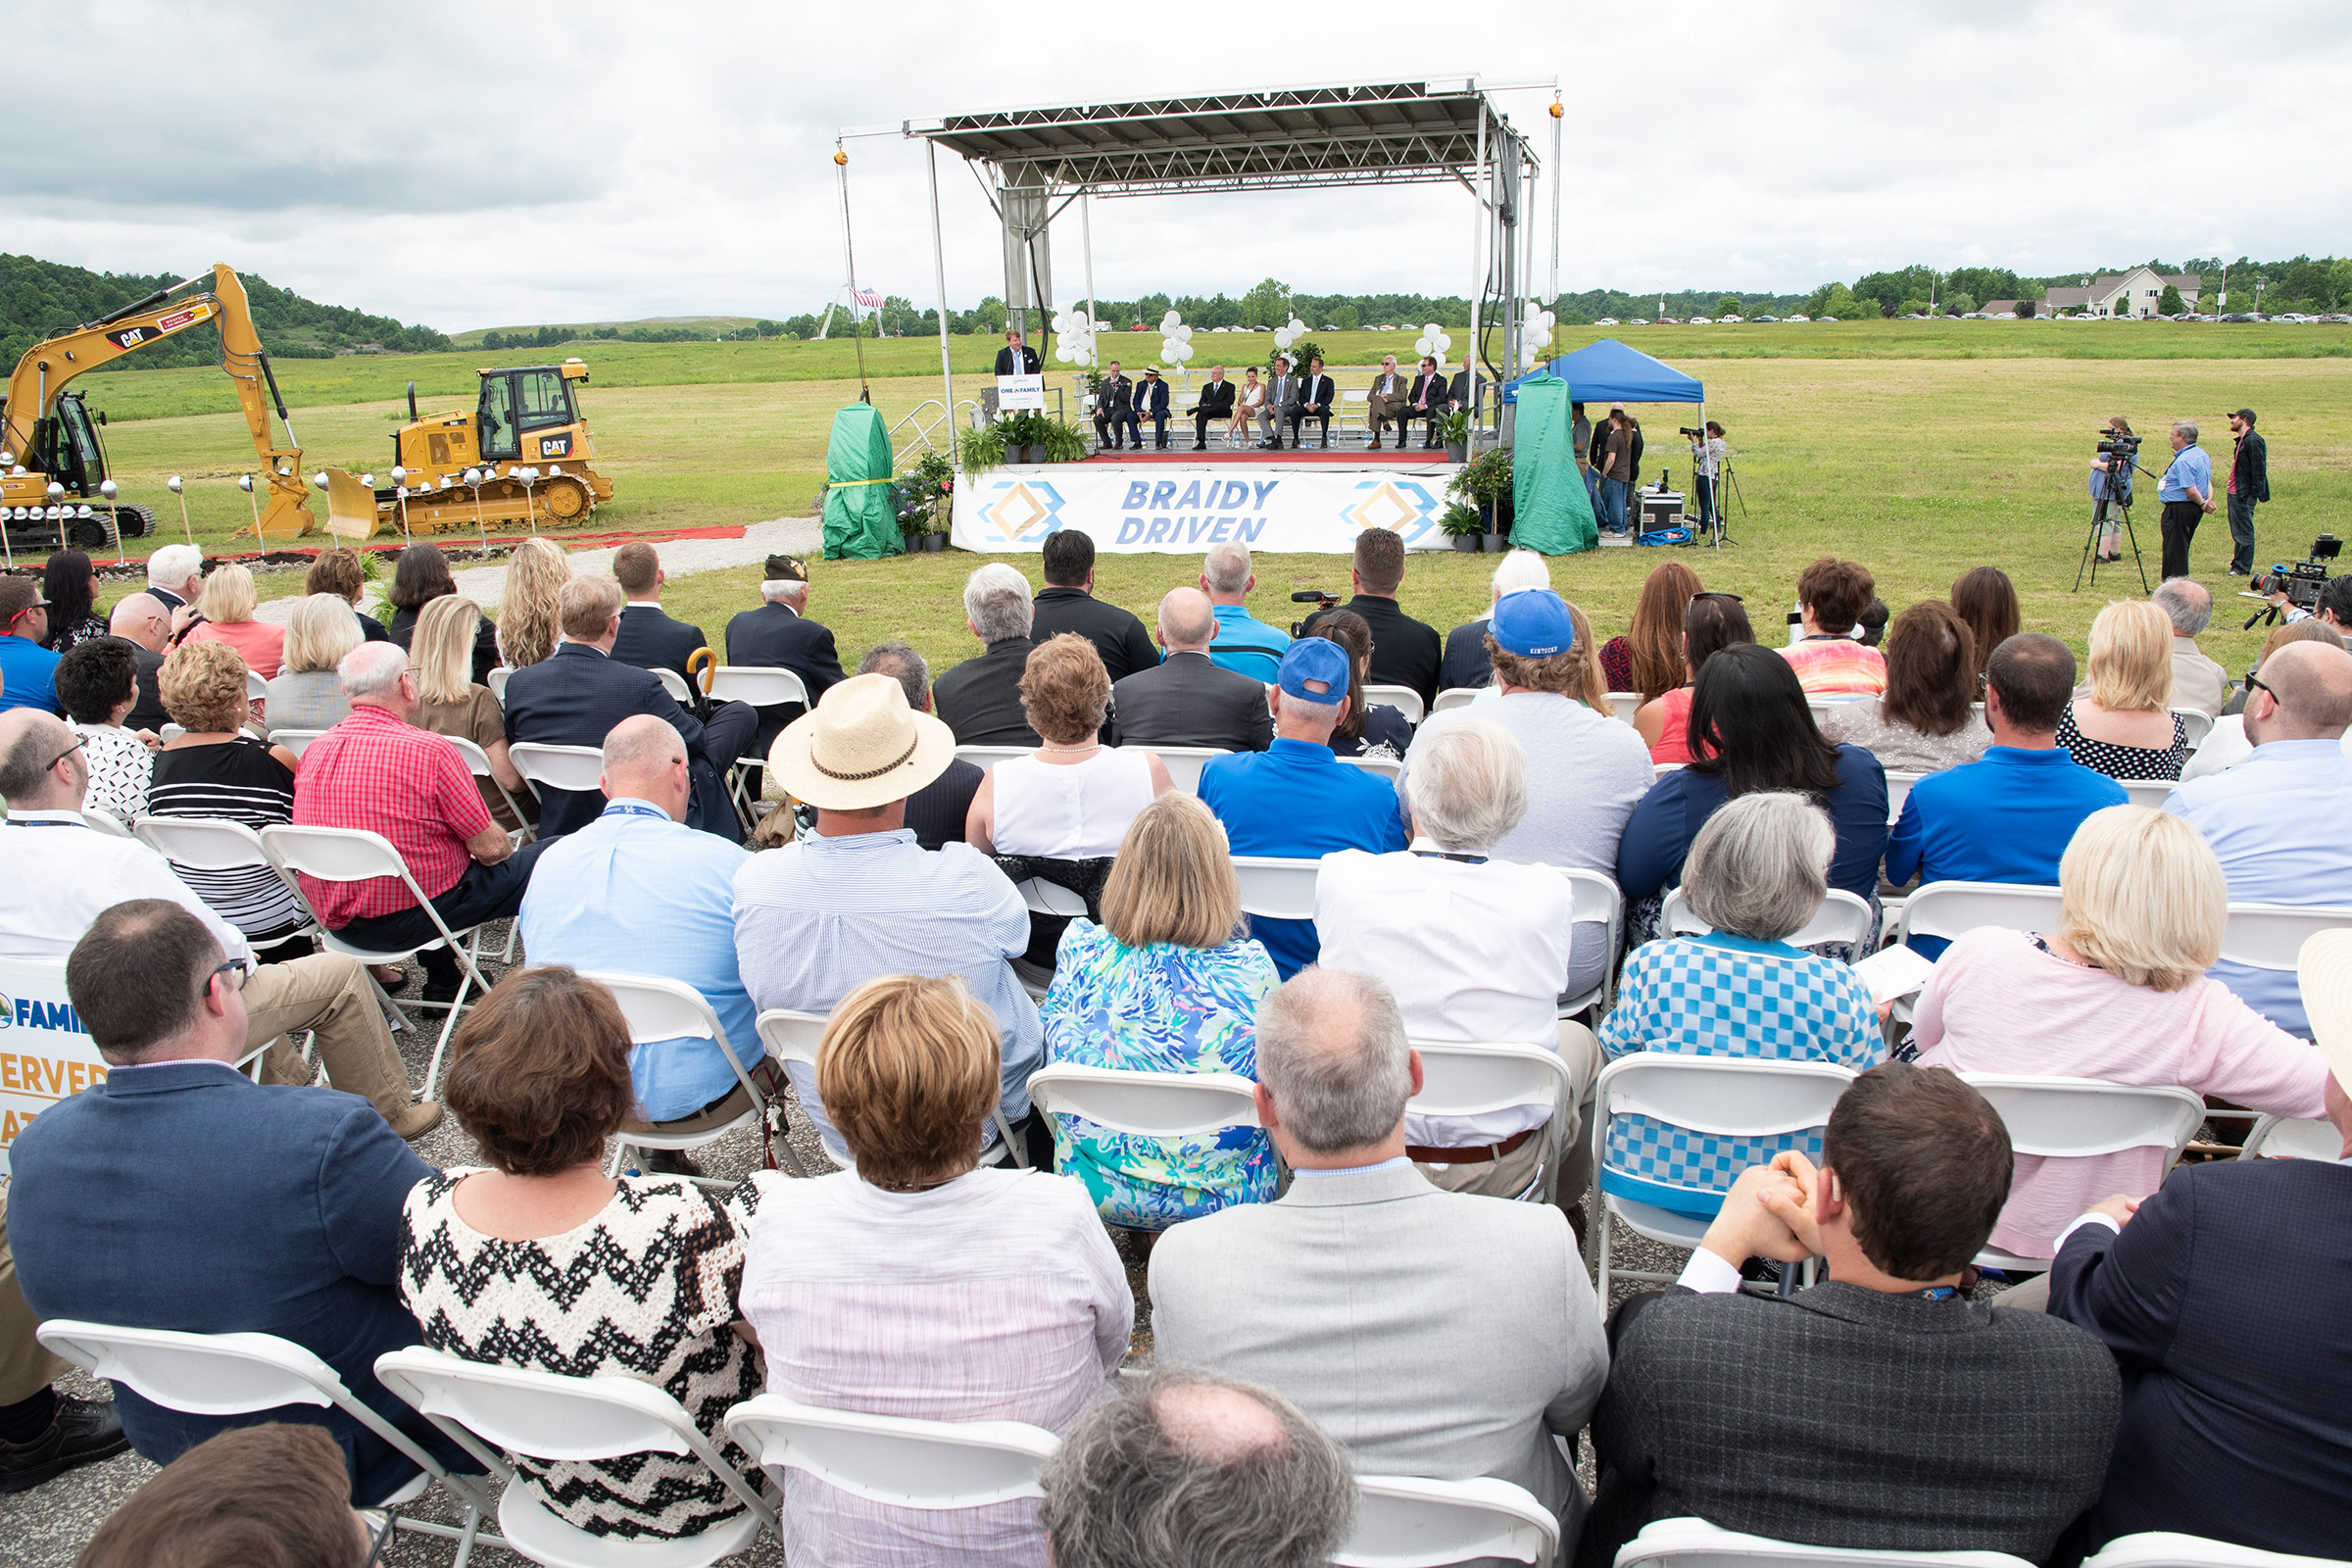 A crowd gathers at the groundbreaking for the new Braidy aluminum plant on June 1, 2018 (John Flavell)